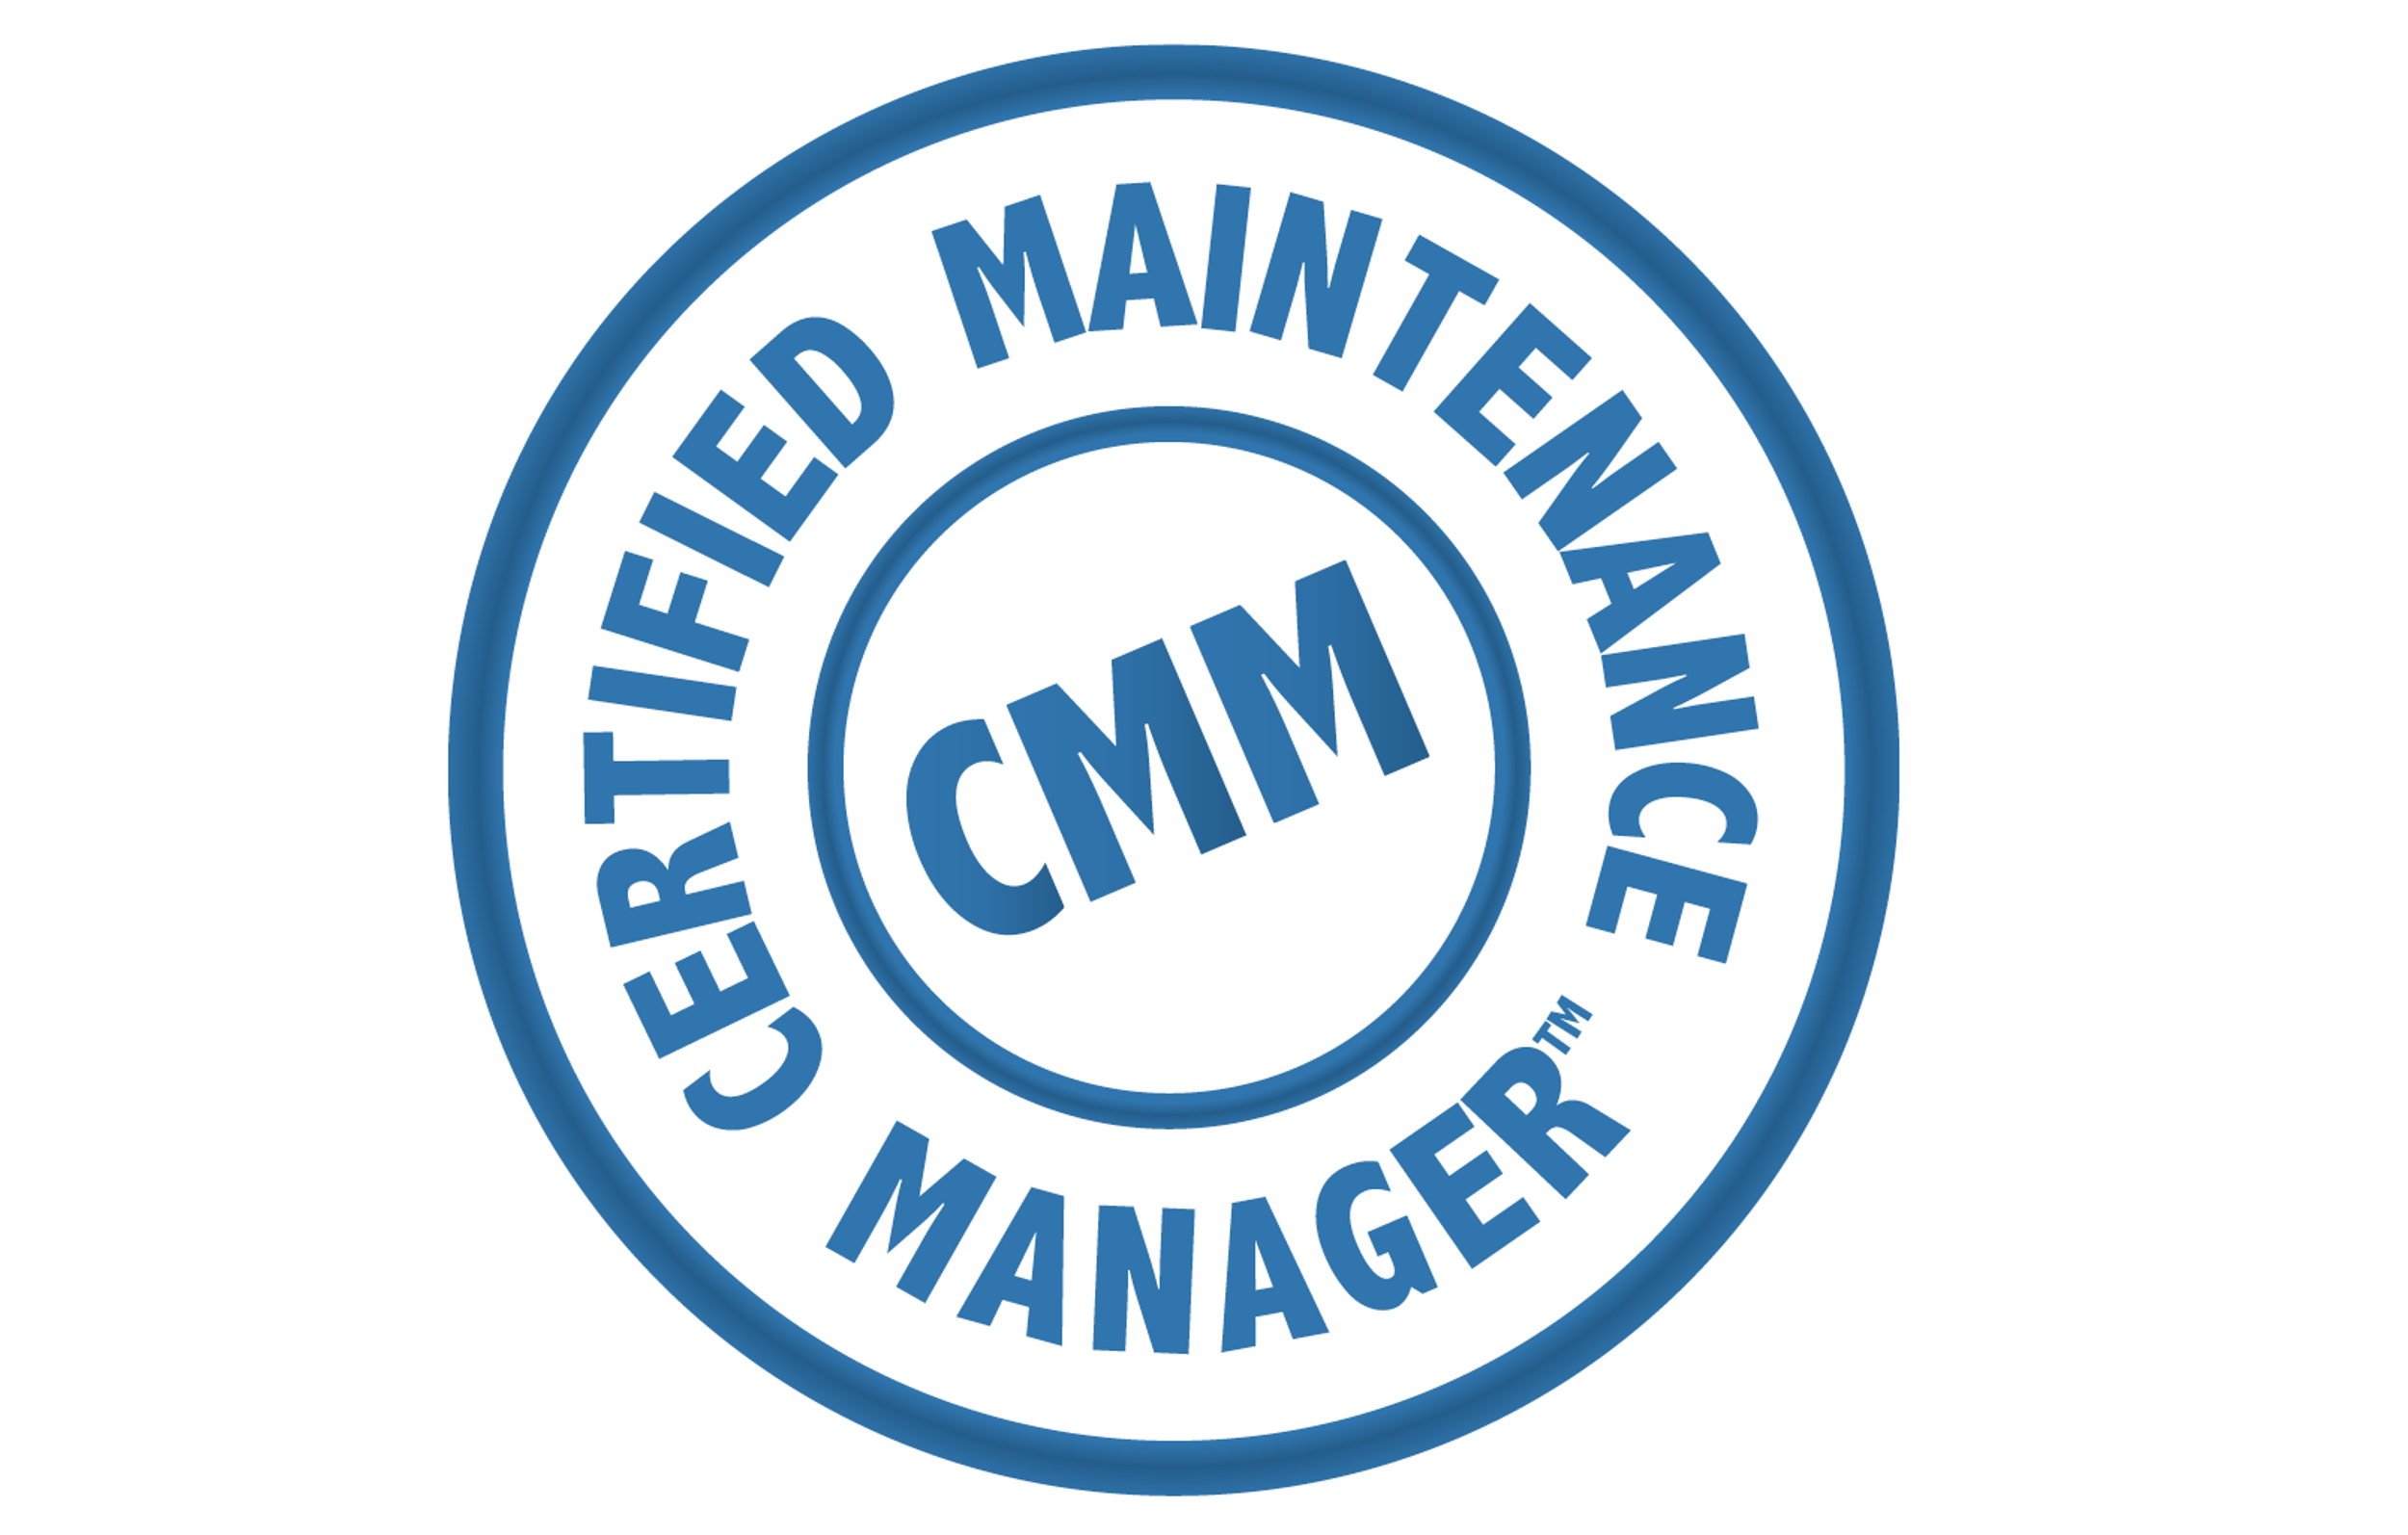 October 2022 Certified Maintenance Manager Workshop by Reliabilityweb.com